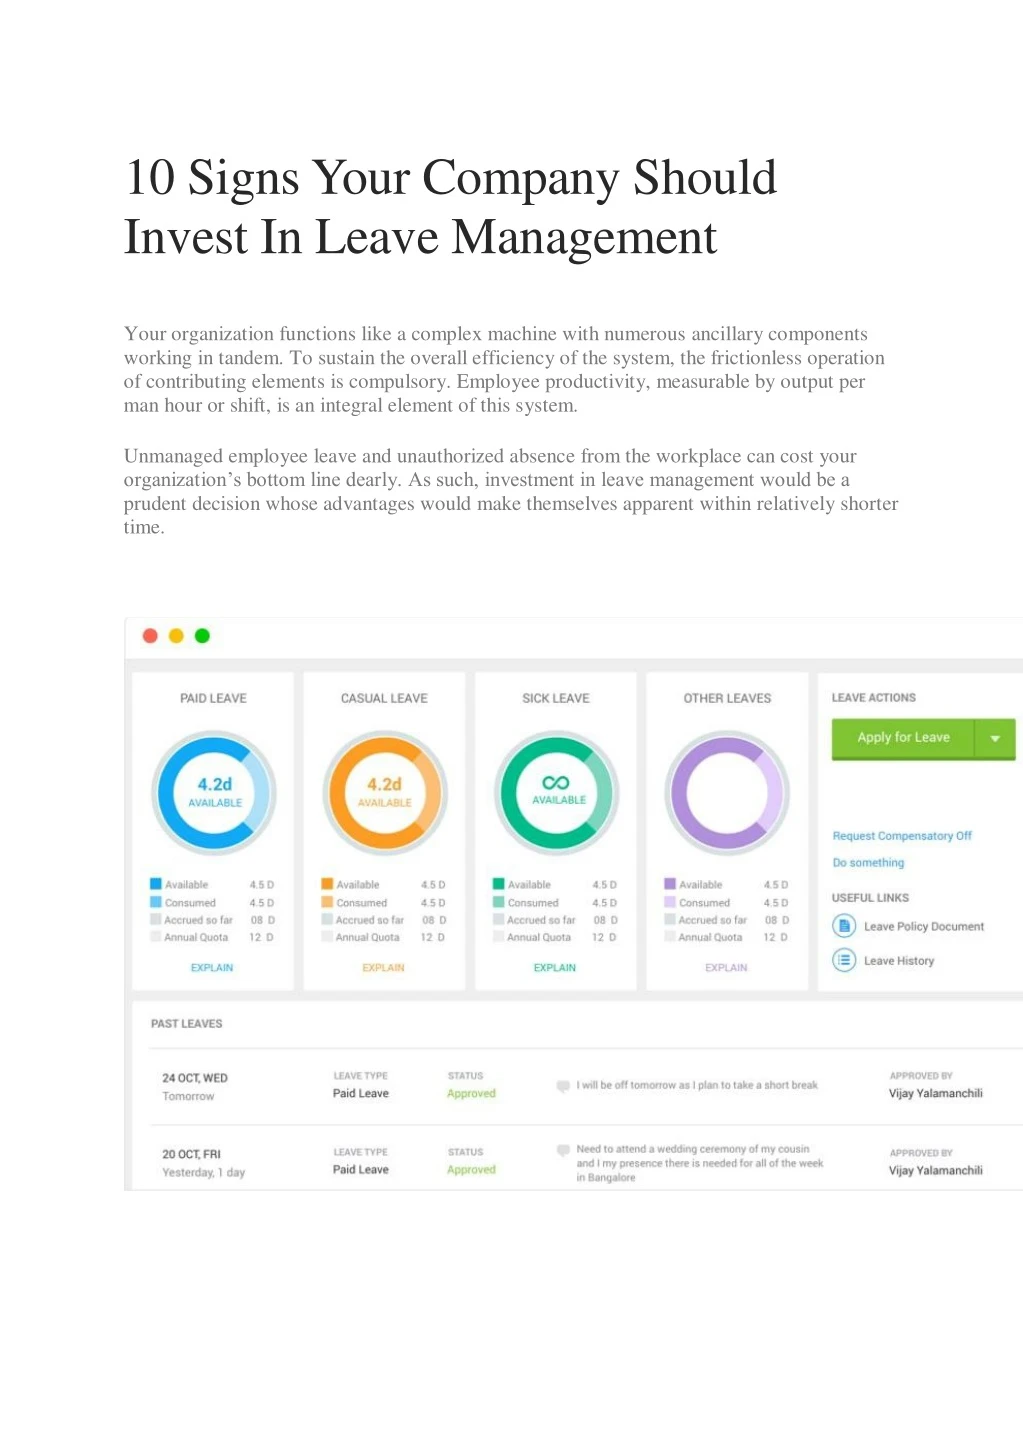 10 signs your company should invest in leave